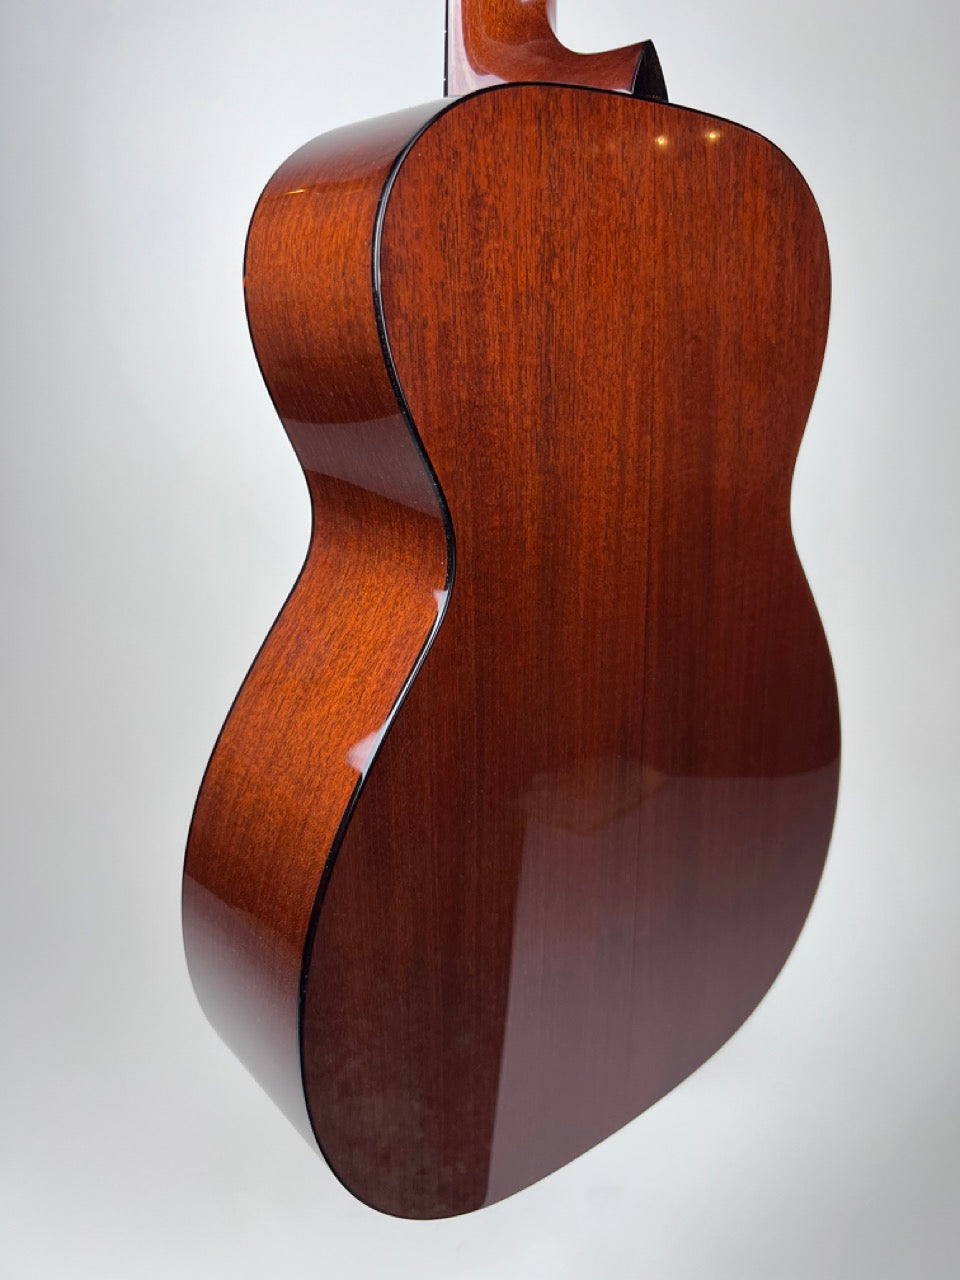 2022 Collings 14 Fret 01T (Baked Top)